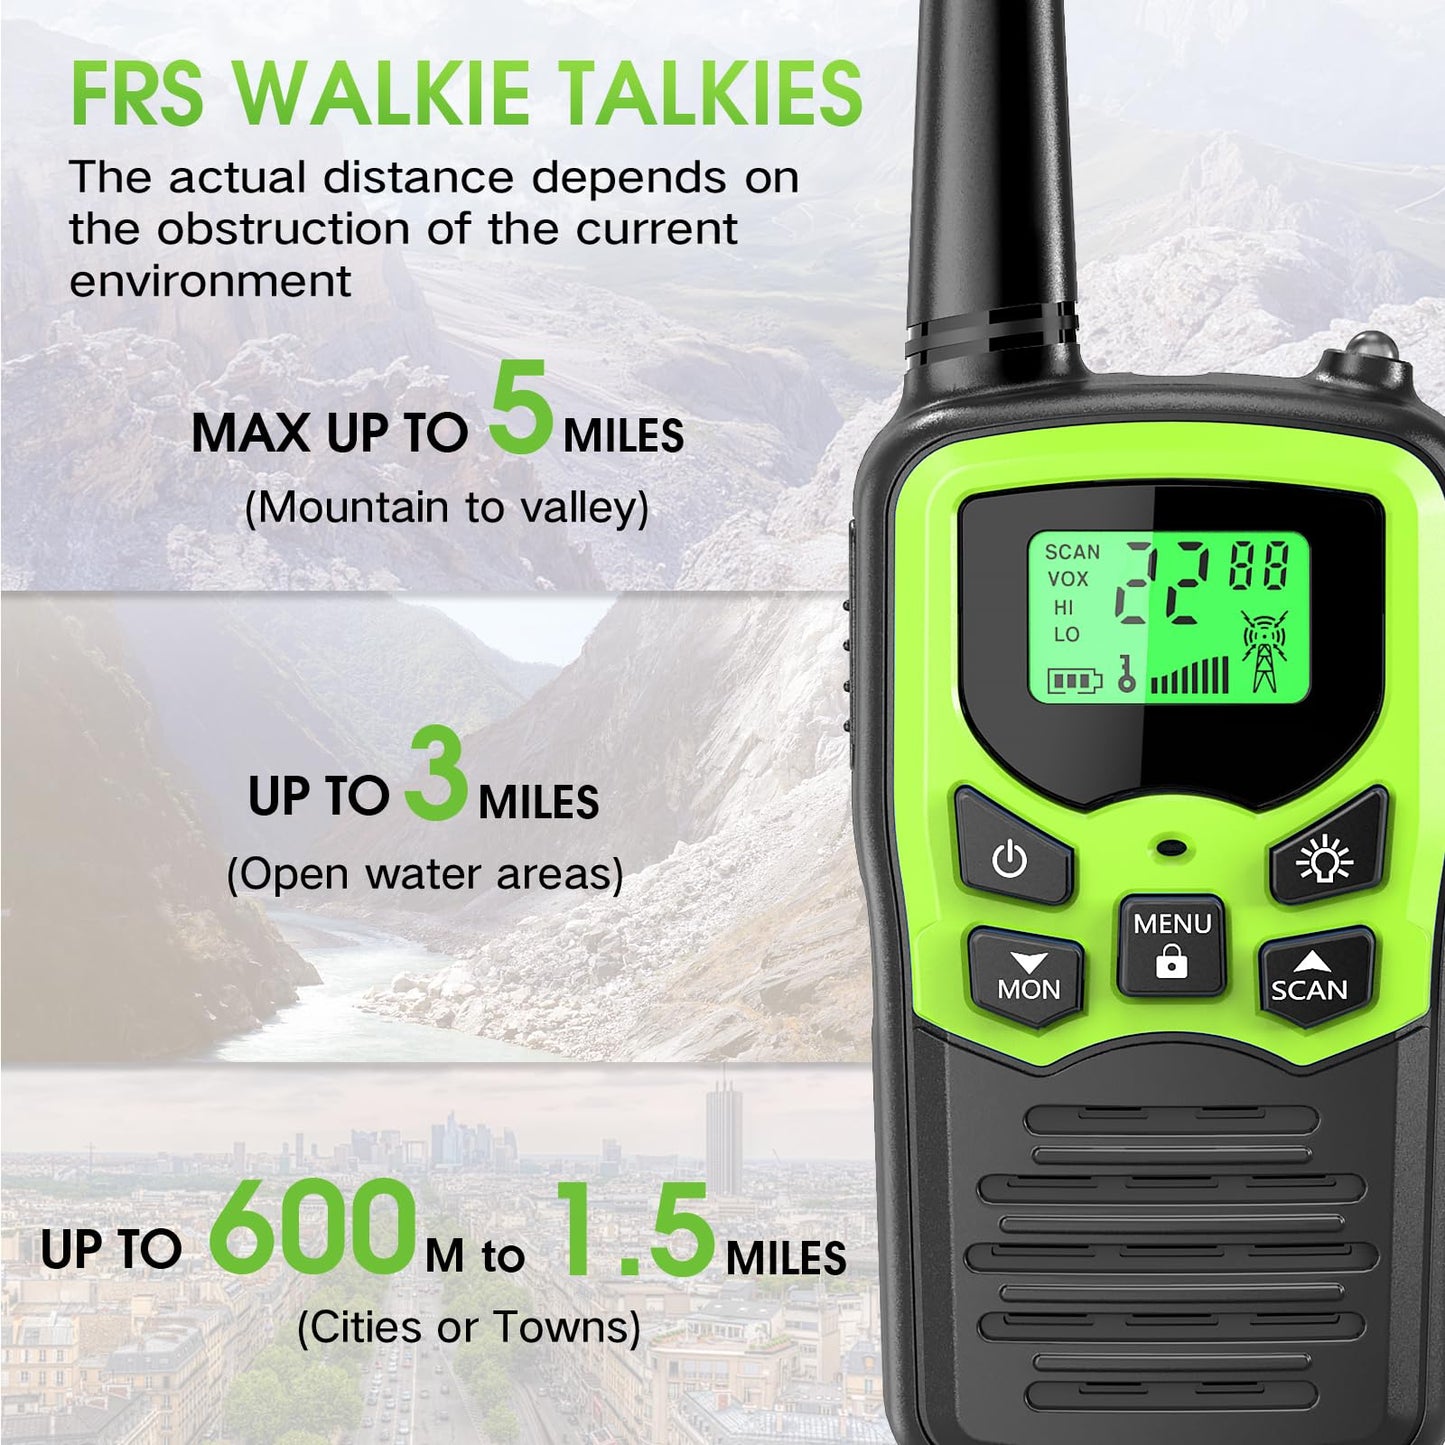 Walkie Talkies with 22 FRS Channels, MOICO Walkie Talkies for Adults with LED Flashlight VOX Scan LCD Display, Long Range Family Walkie Talkie Radios for Hiking Camping Trip (Green, 4 Pack)